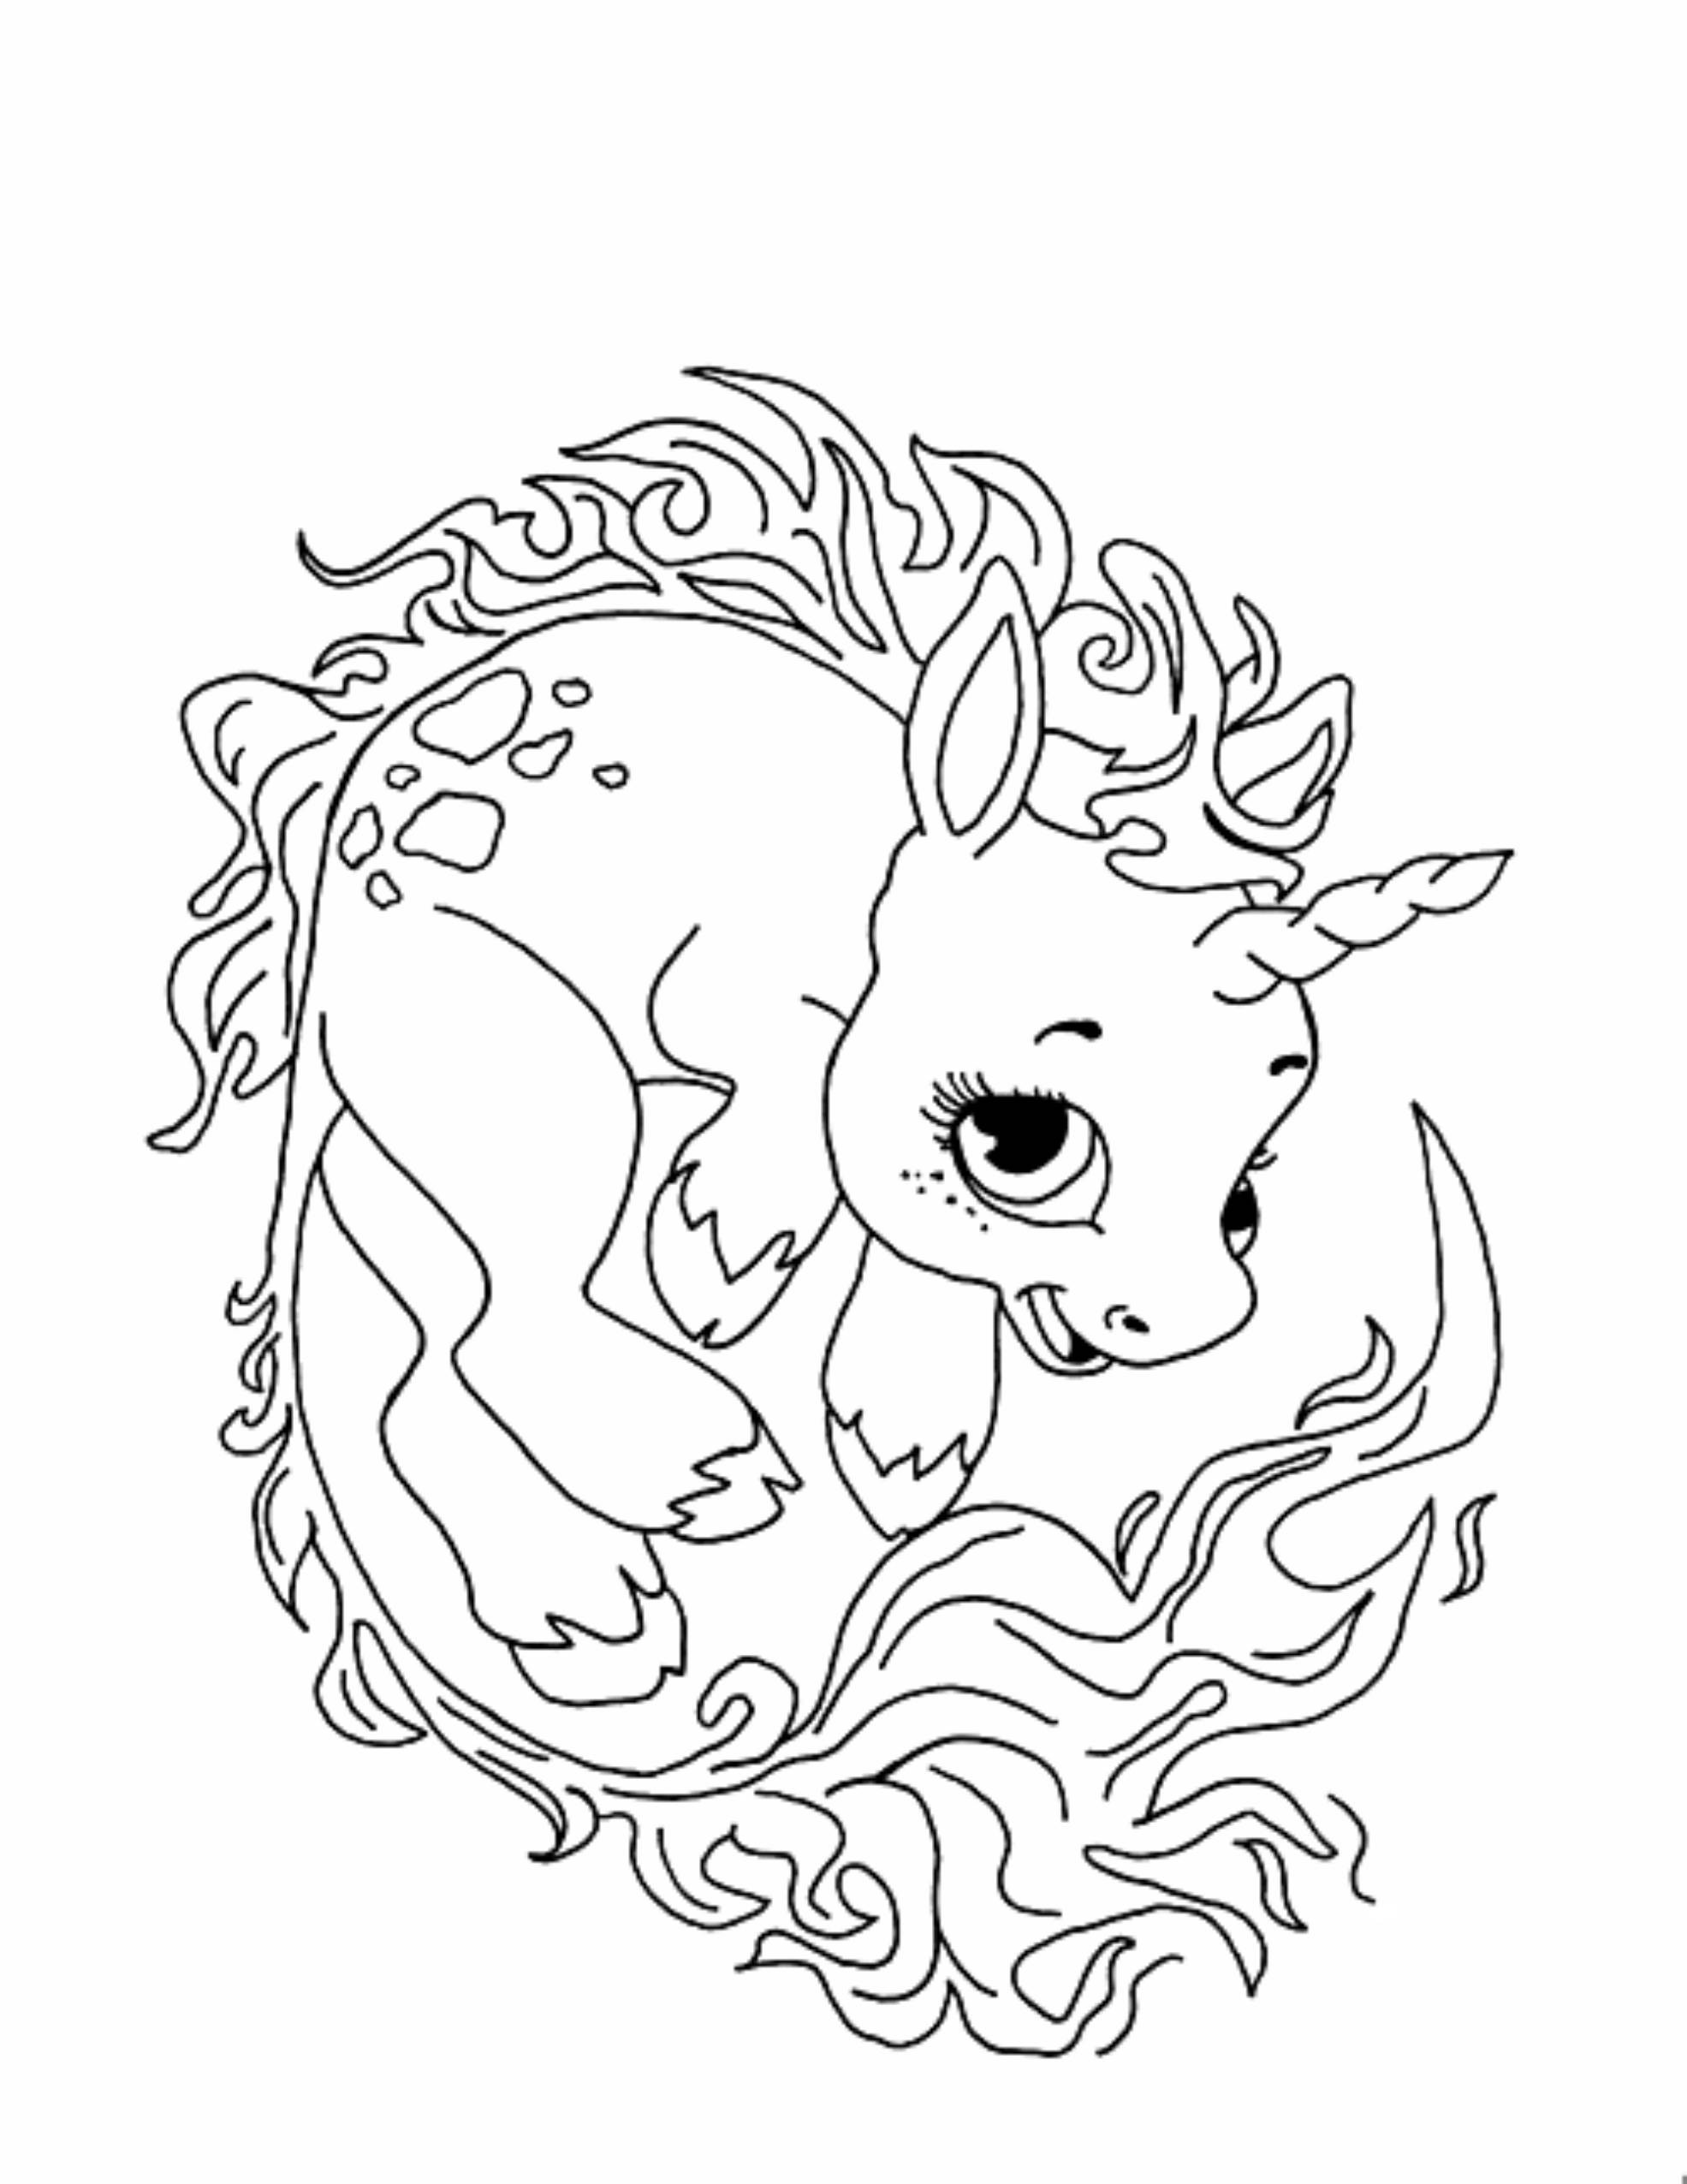 Coloring Pages For Girls Unicorns
 Print & Download Unicorn Coloring Pages for Children